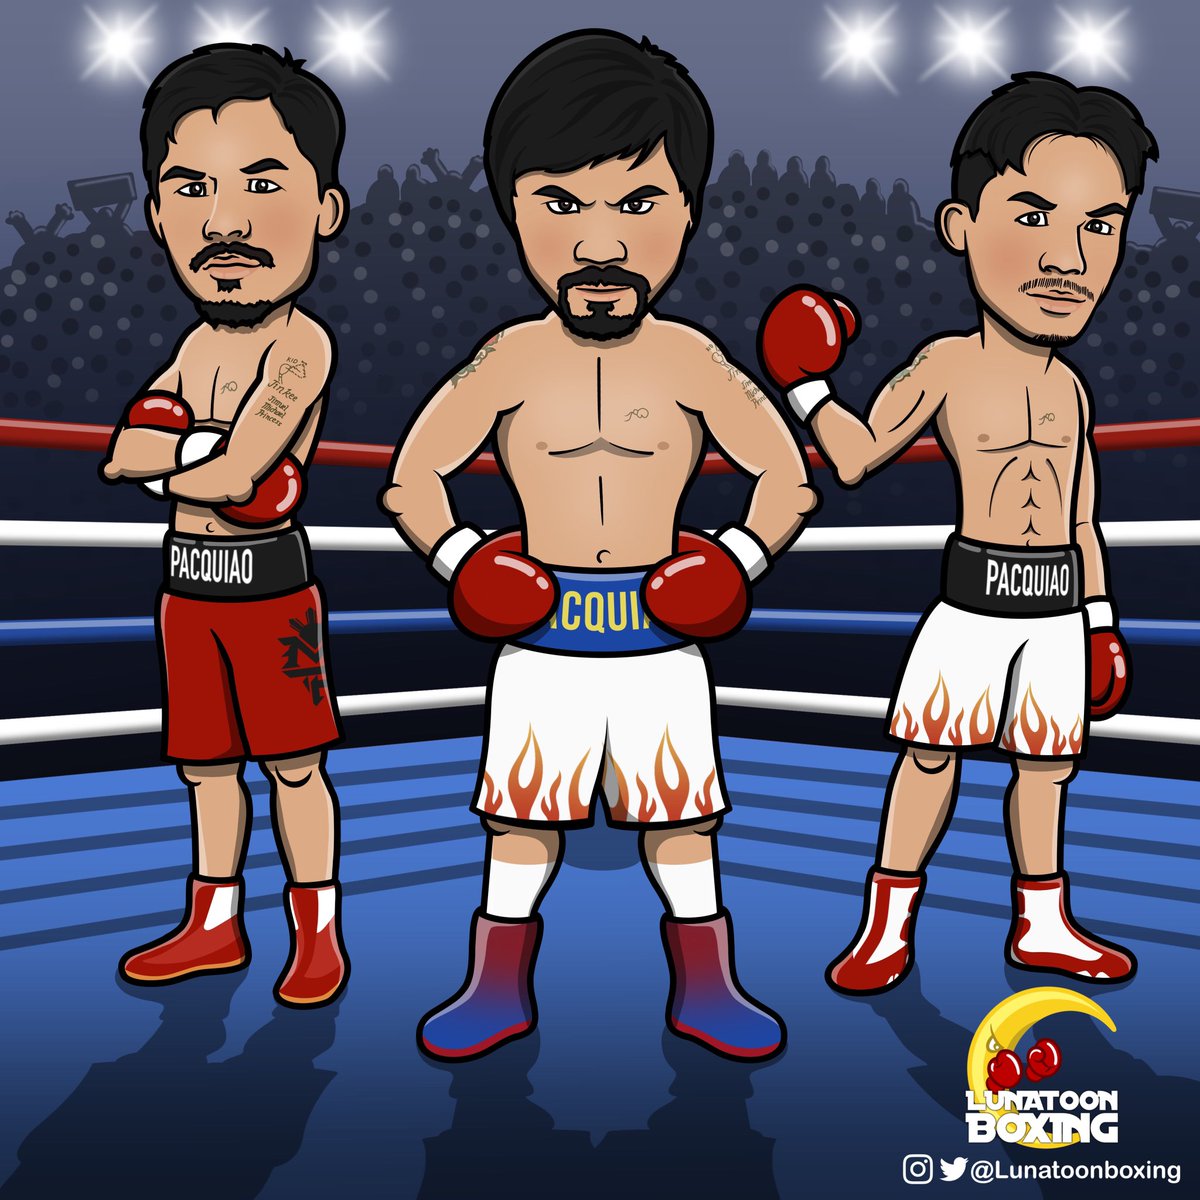 Congratulations to @MannyPacquiao on a legendary career. One of the best to ever do it 🥊 #Pacquiao #PacquiaoUgas #boxing